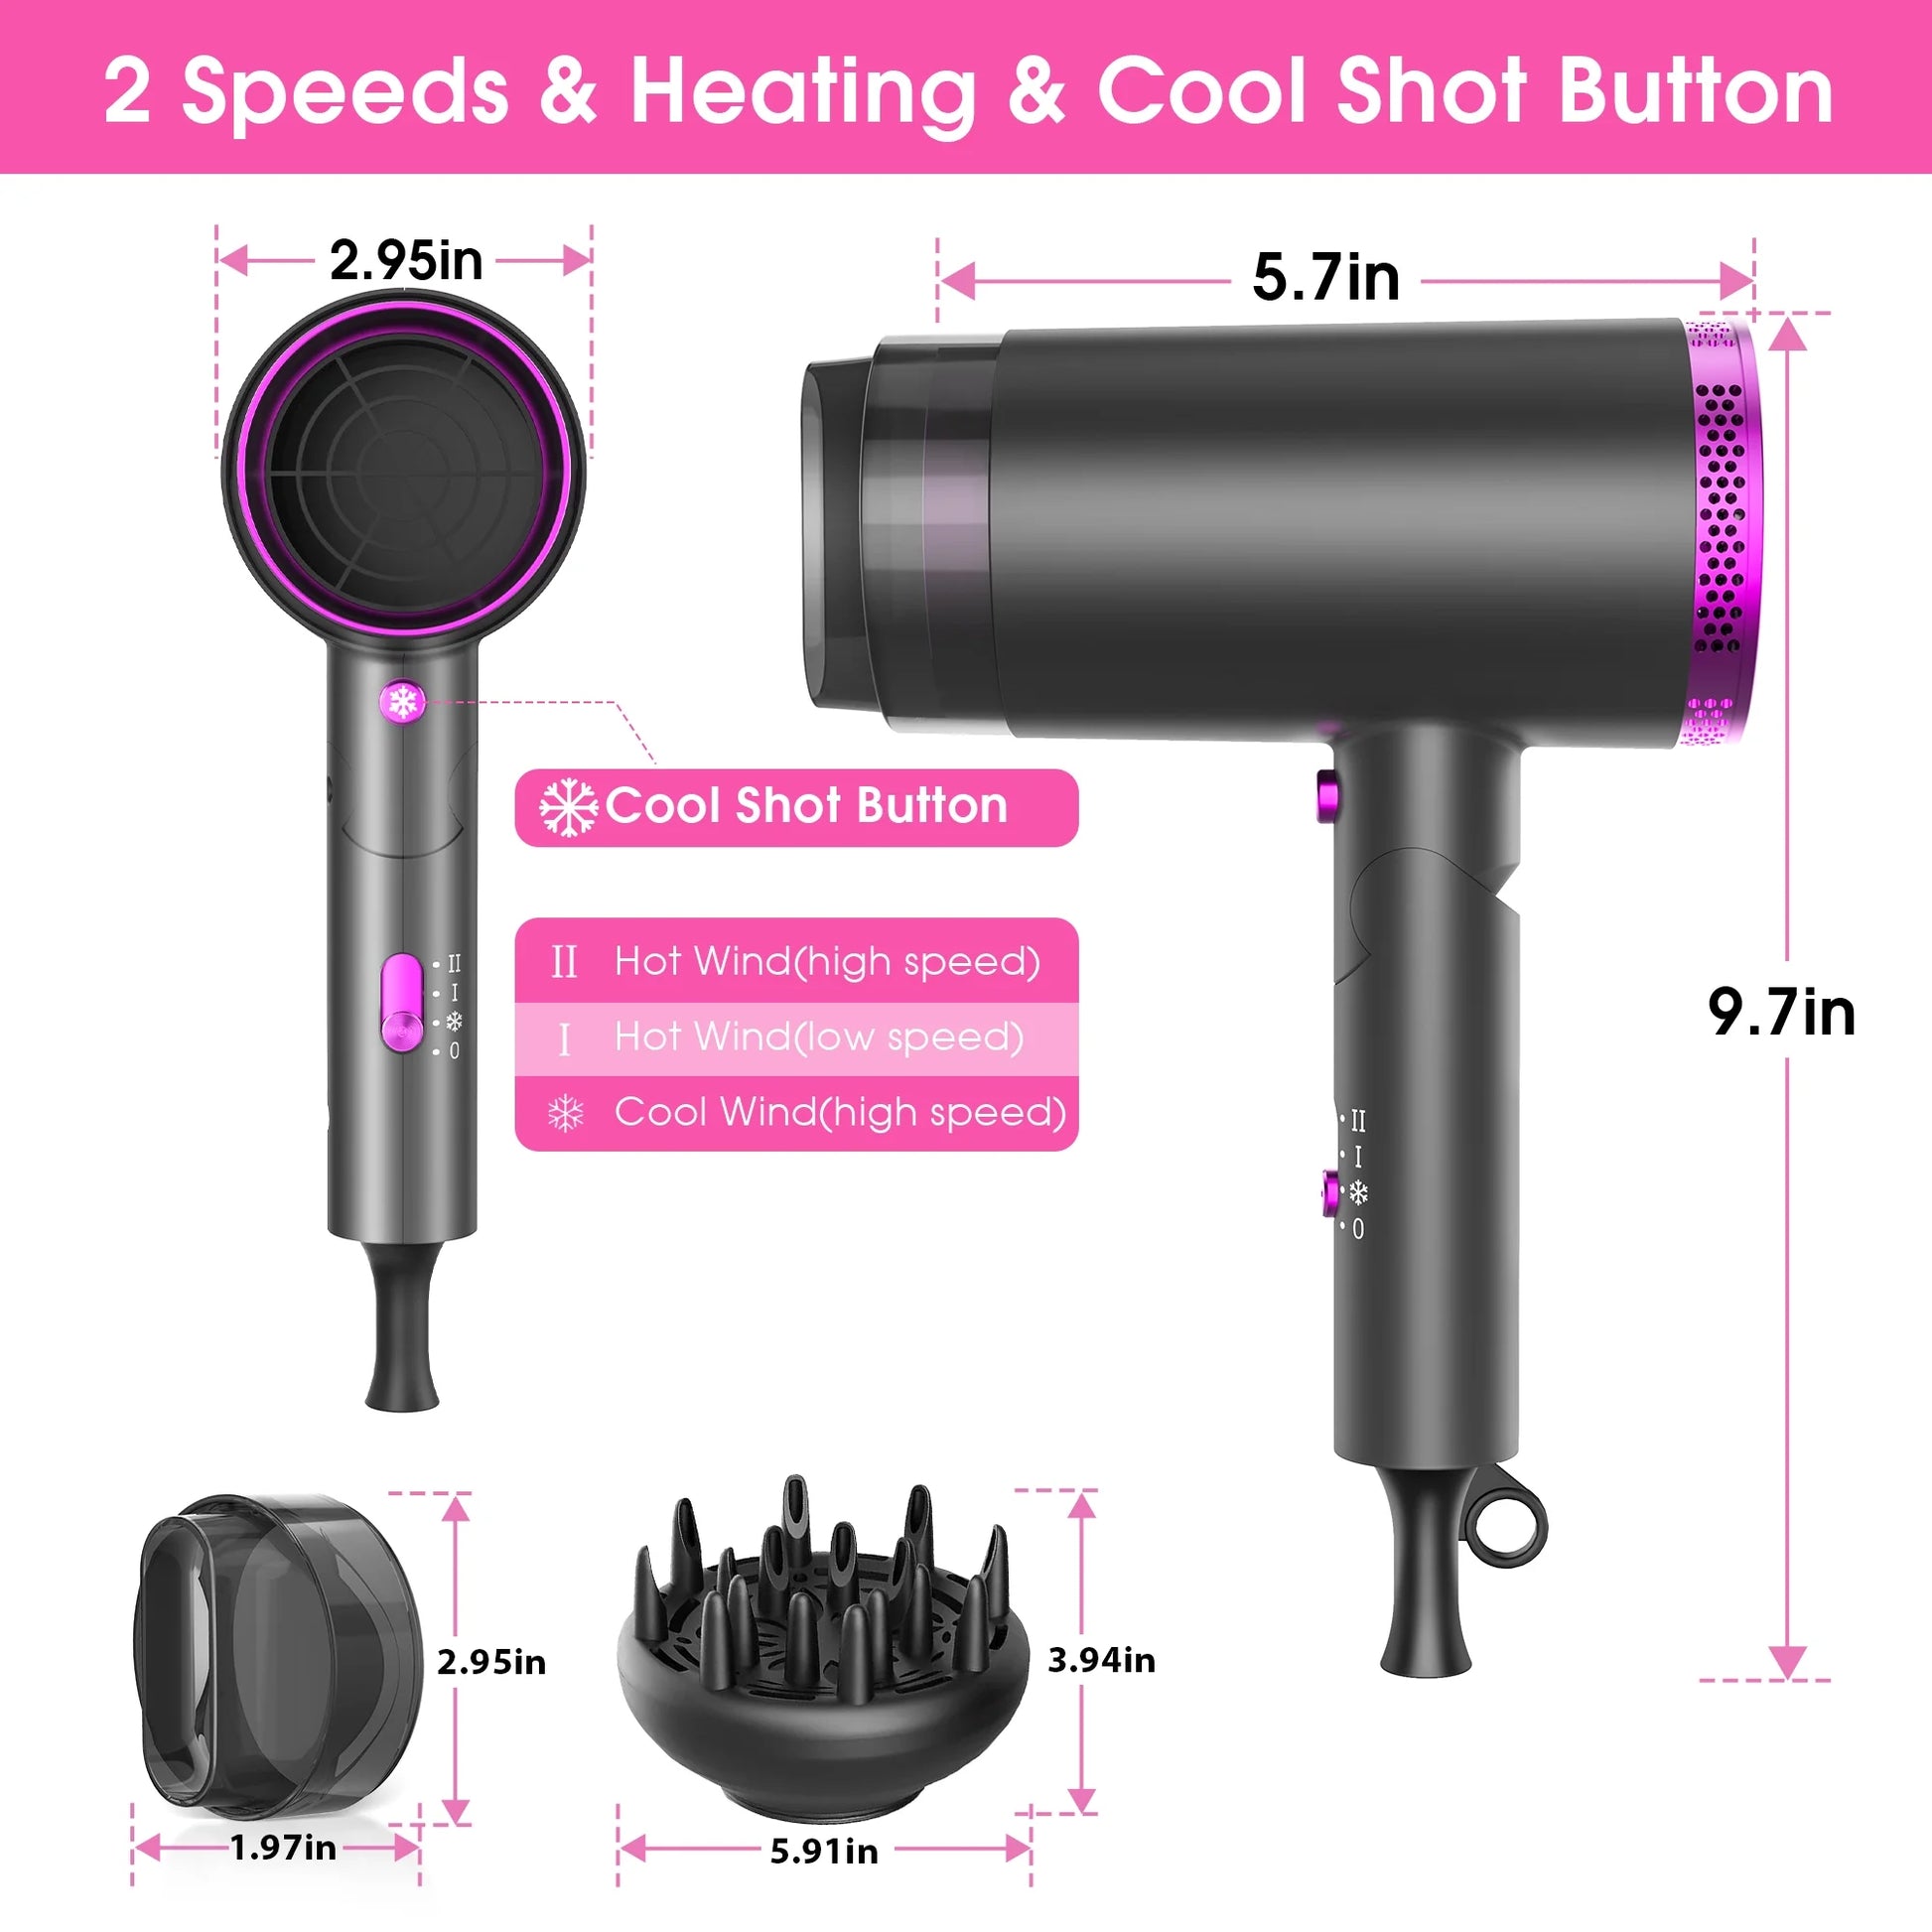 Professional Ionic Hair Blow Dryer with 3 Heat Settings, 2 Speeds, 1875W